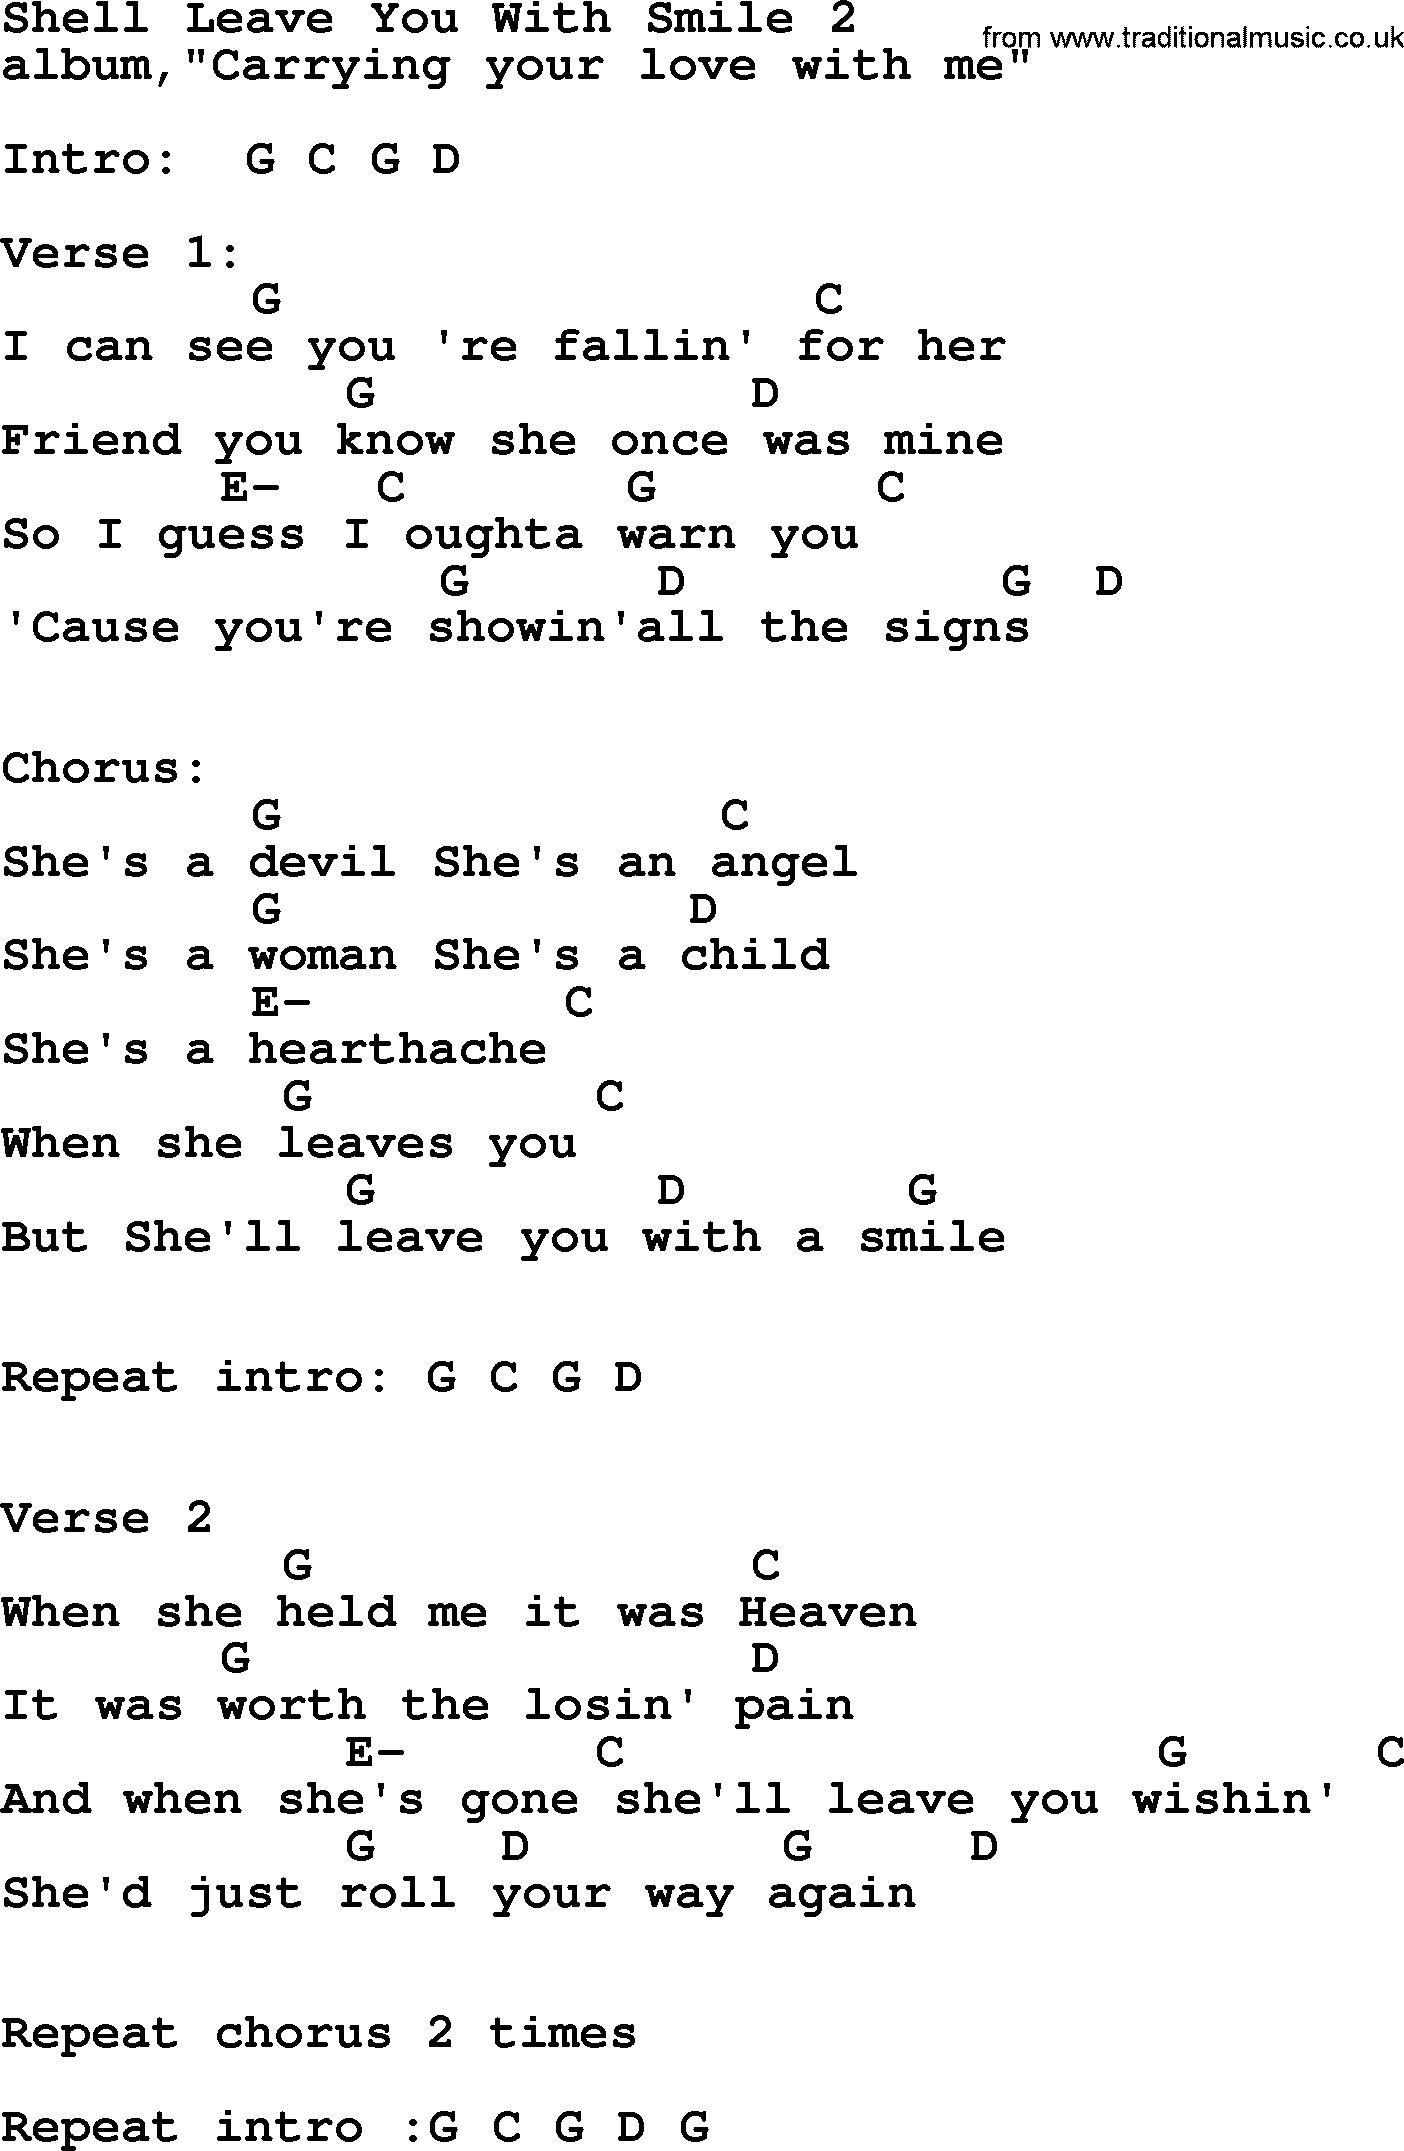 George Strait song: Shell Leave You With Smile 2, lyrics and chords